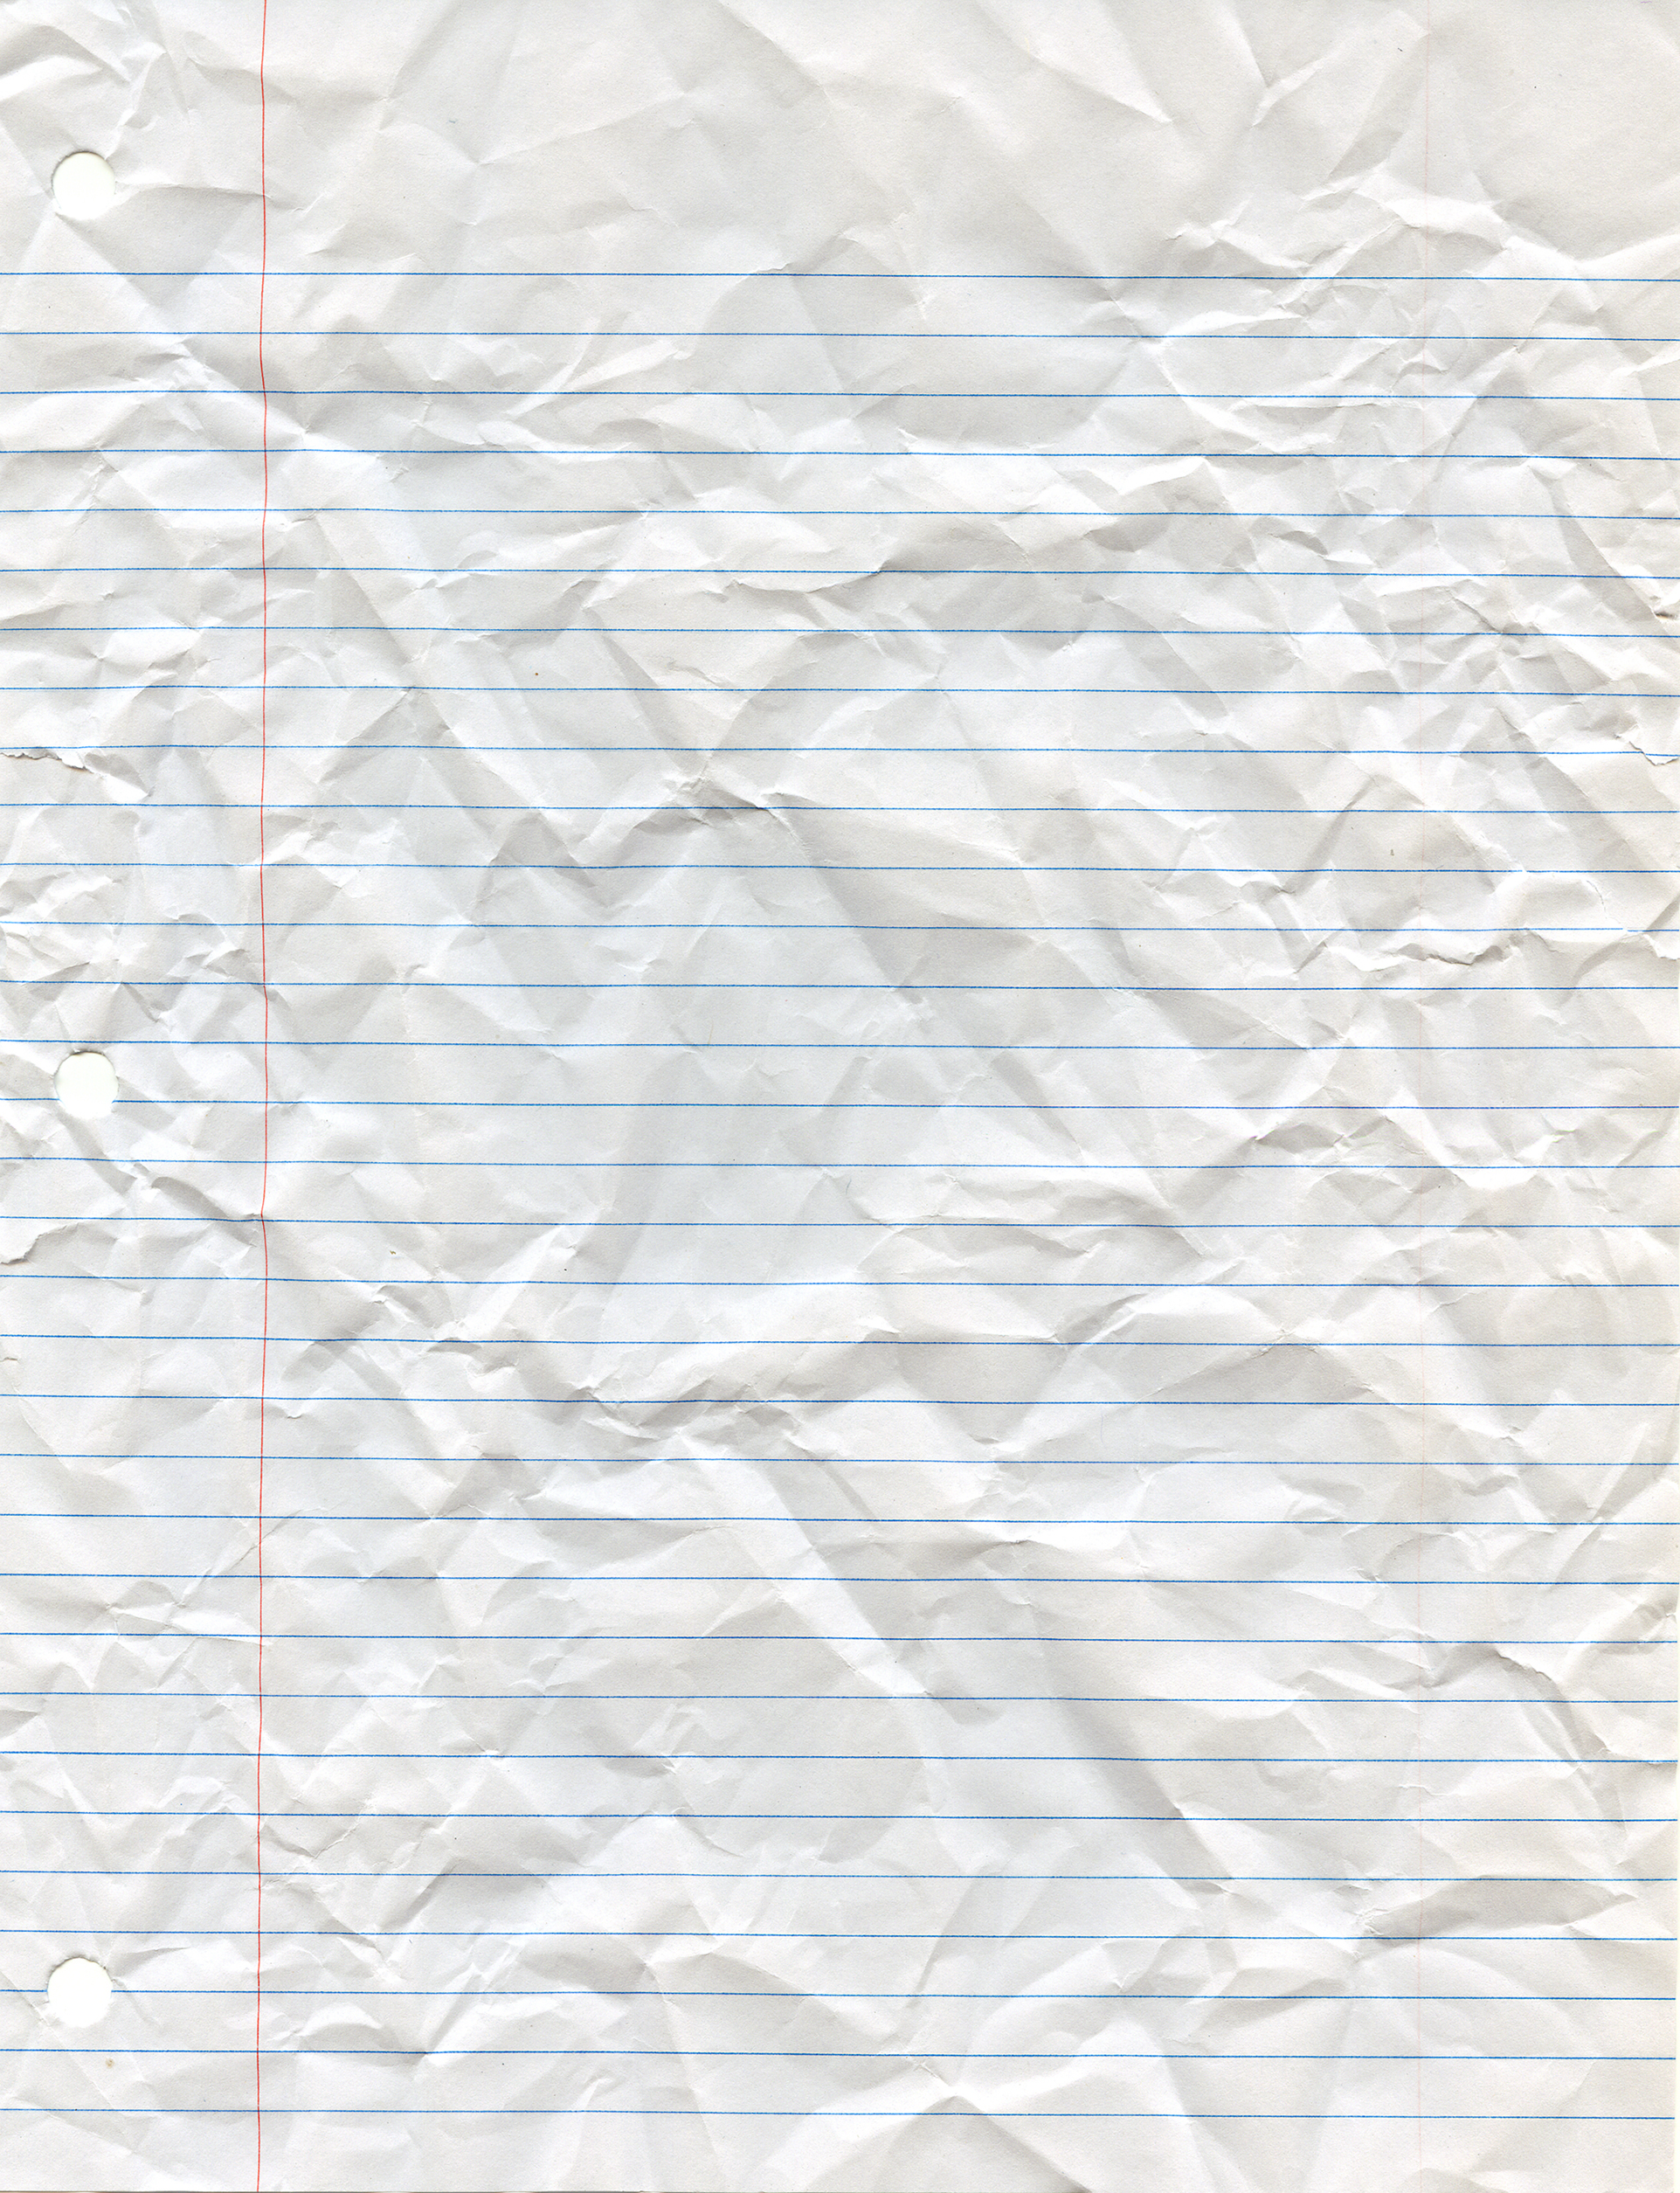 Wrinkled White Blank Plain Paper with Shade of Light and Shadow. Ideal for  Background or Wall Wallpaper with Copy Space for Text Stock Image - Image  of pattern, crush: 185374435